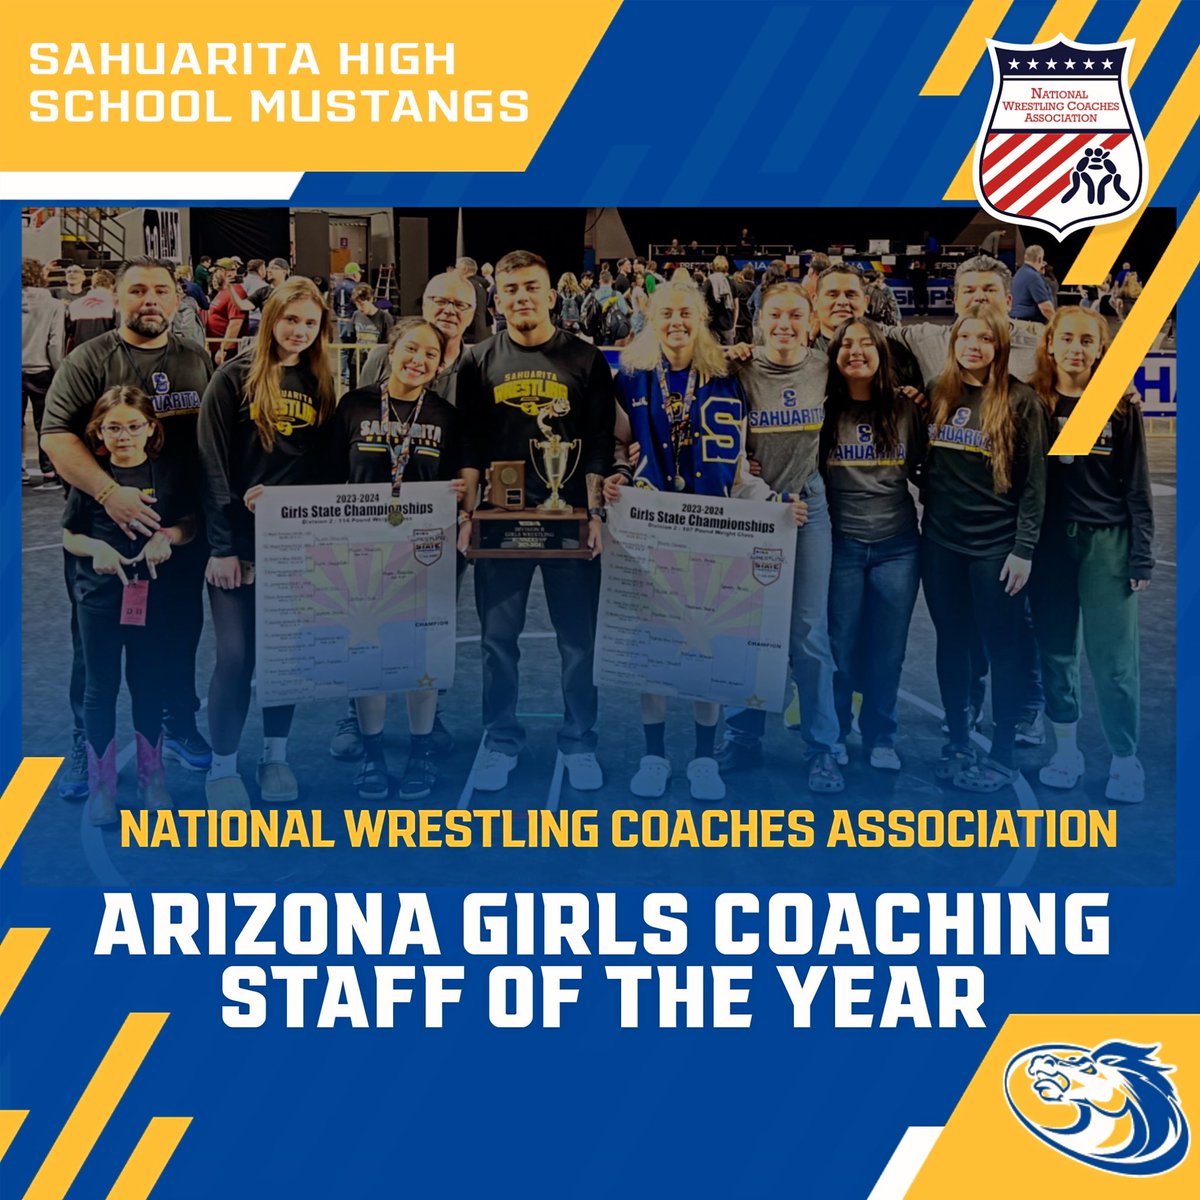 🐴Sahuarita Girls Coaching Staff has been named AZ Girls Staff of the year❗️ NWCA Coaching Awards for our staff include: 🟡2022 AZ Boys Staff of the Year 🔵2022 Sect 7 Boys Staff of the Year 🟡2023 AZ Boys Coach of the Year 🔵2024 AZ Girls Staff of the Year #HORSEPOWER🐴💪🏼